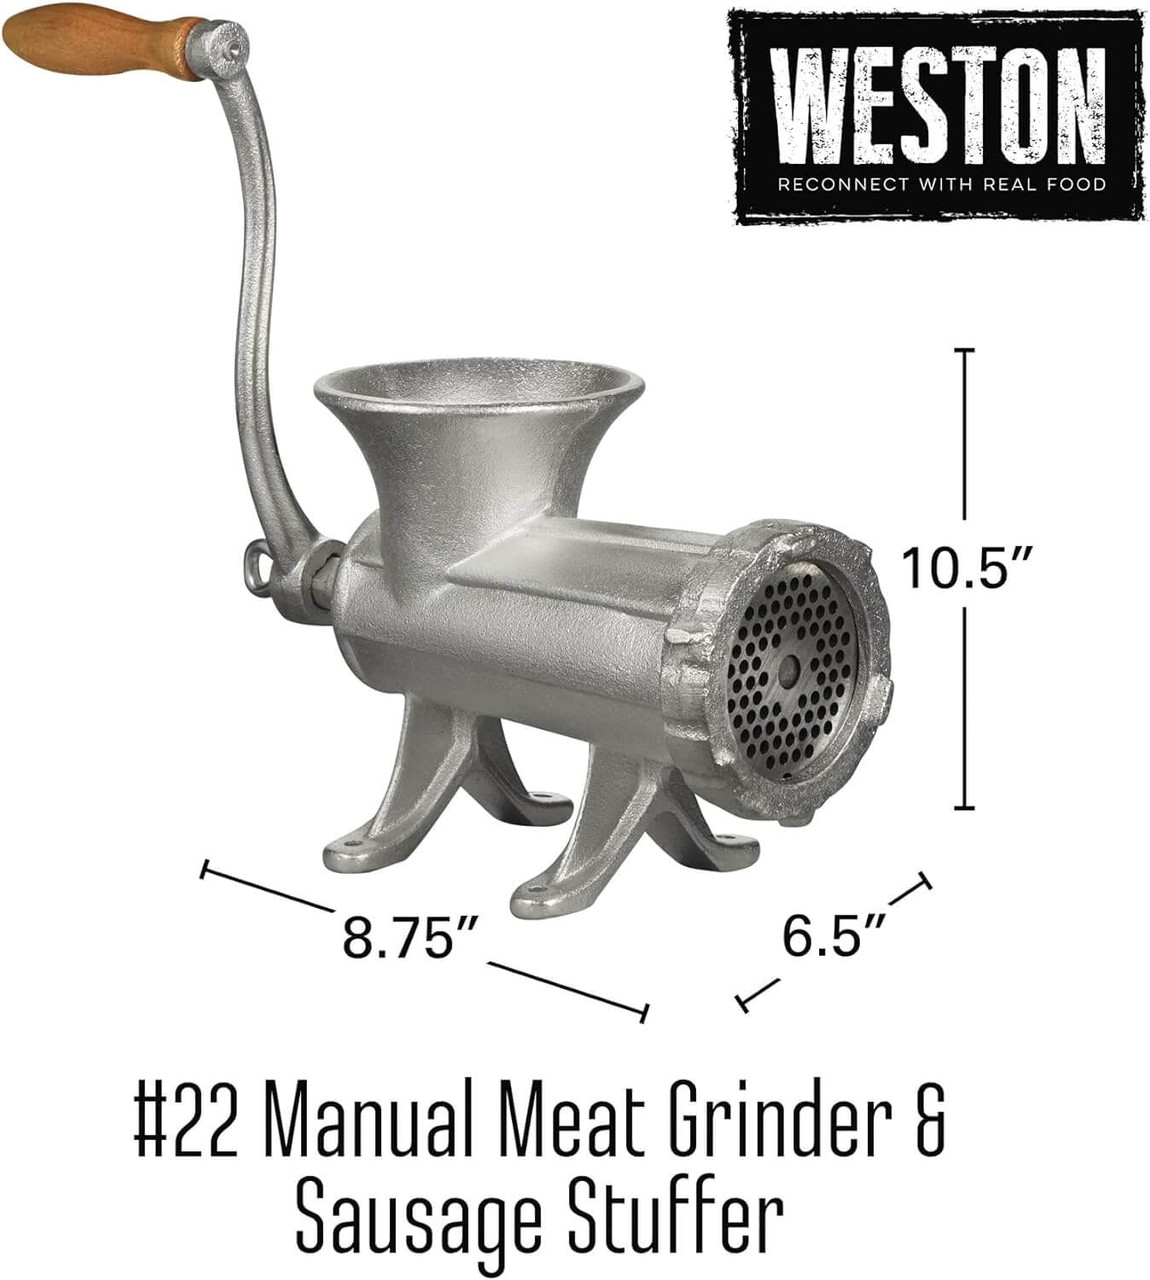 Weston #22 Tin-Coated Sausage Stuffing Manual Meat Grinder-Chicken Pieces